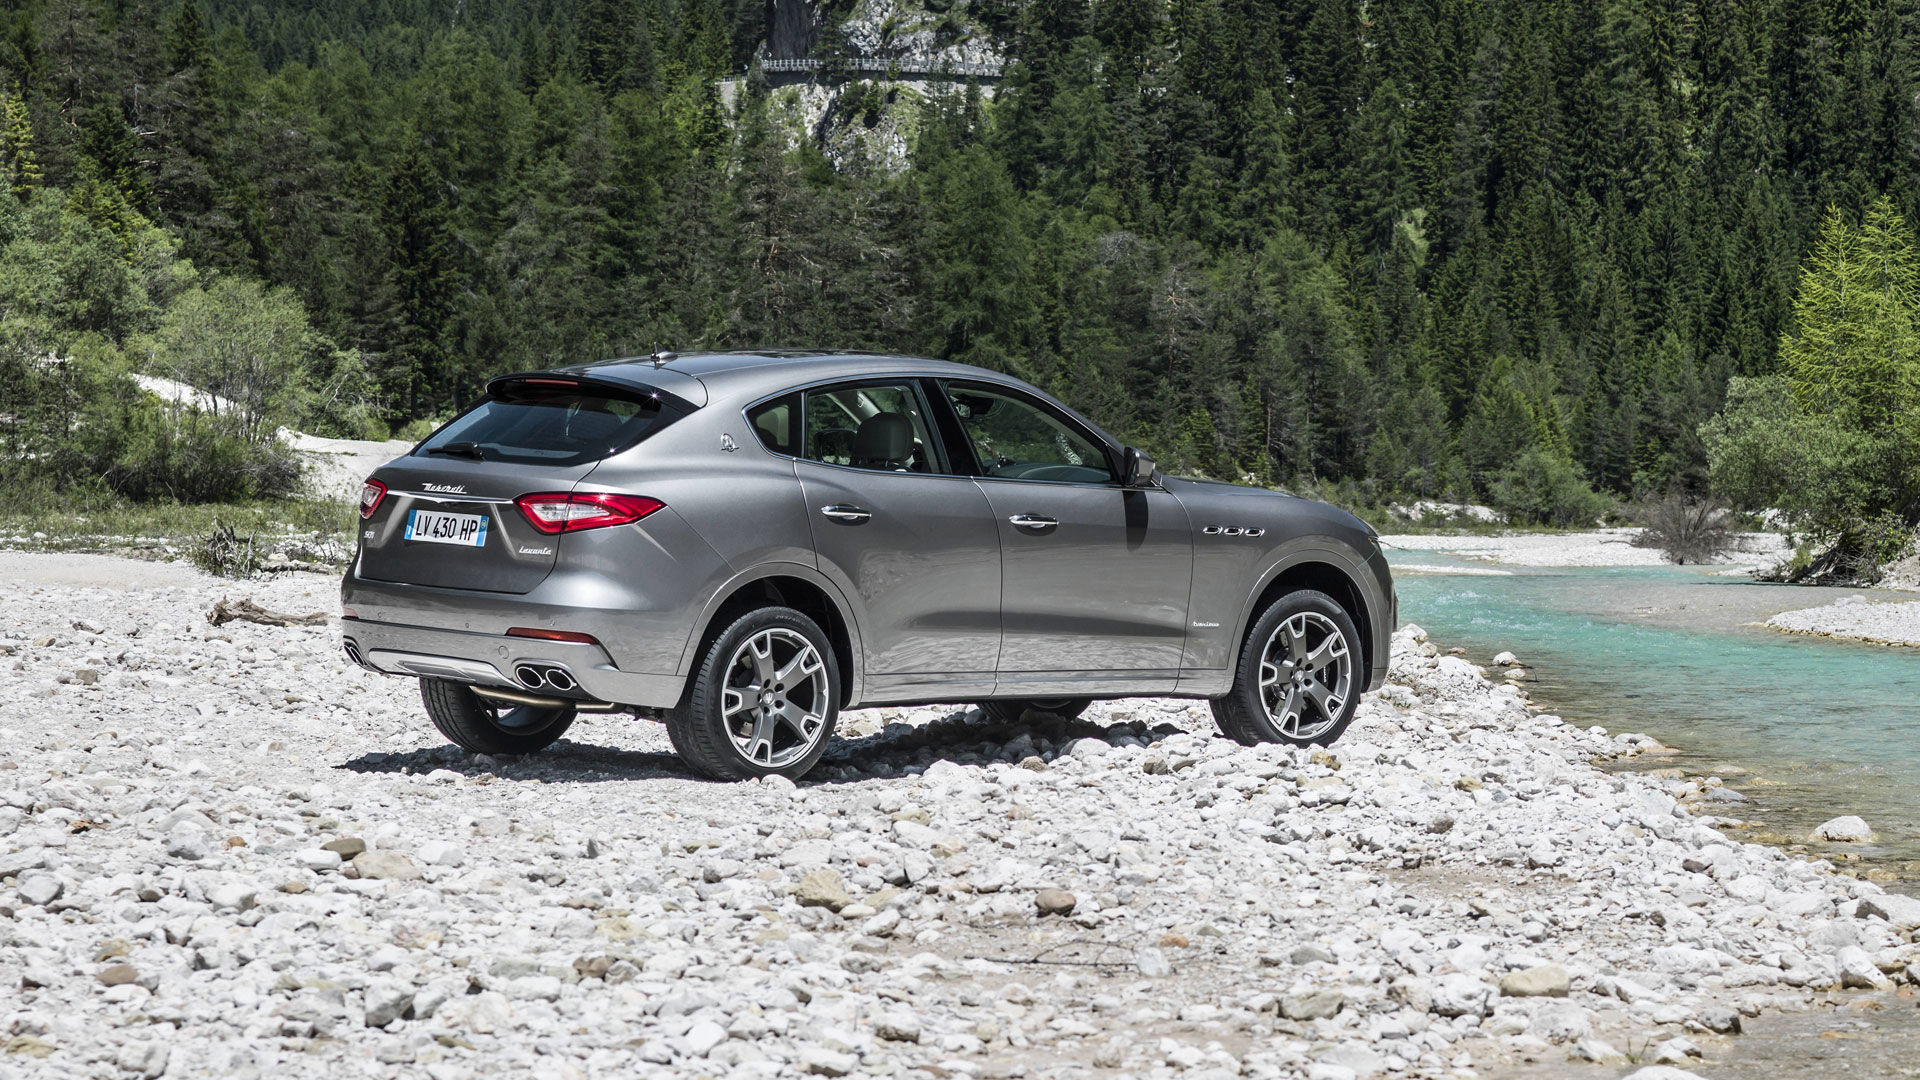 Maserati Levante grey - rear and side view- river landscape perspective